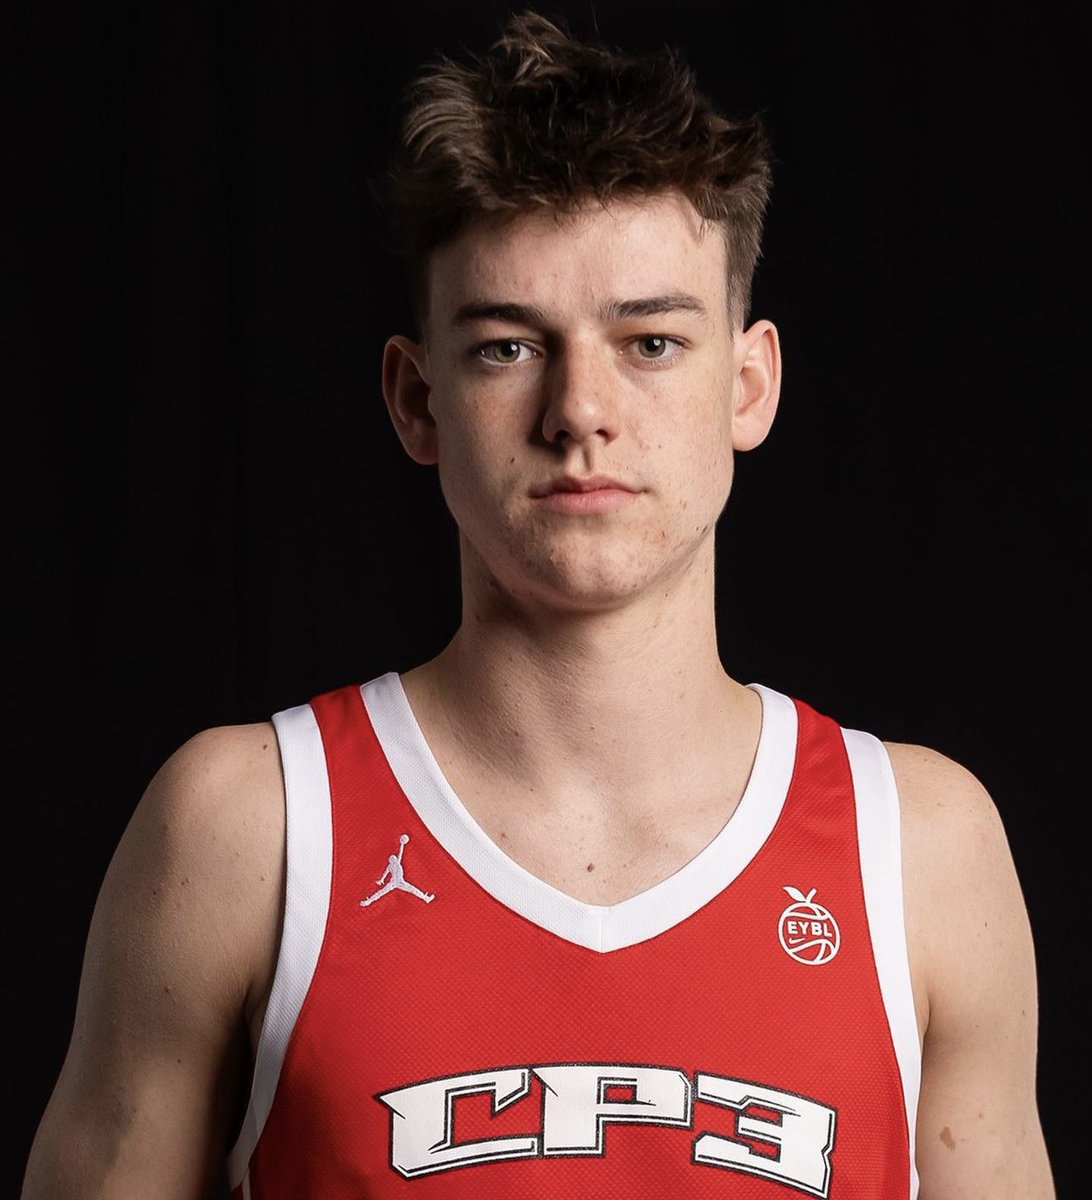 Class of 2026 6’7 (Team CP3 EYBL) Cole Cloer has been offered by North Carolina. Cole has excellent mechanics, explosive scorer from three, makes teams pay with his nonstop movement off the ball, gives relentless effort on defense, athletic, quick release and great body control.